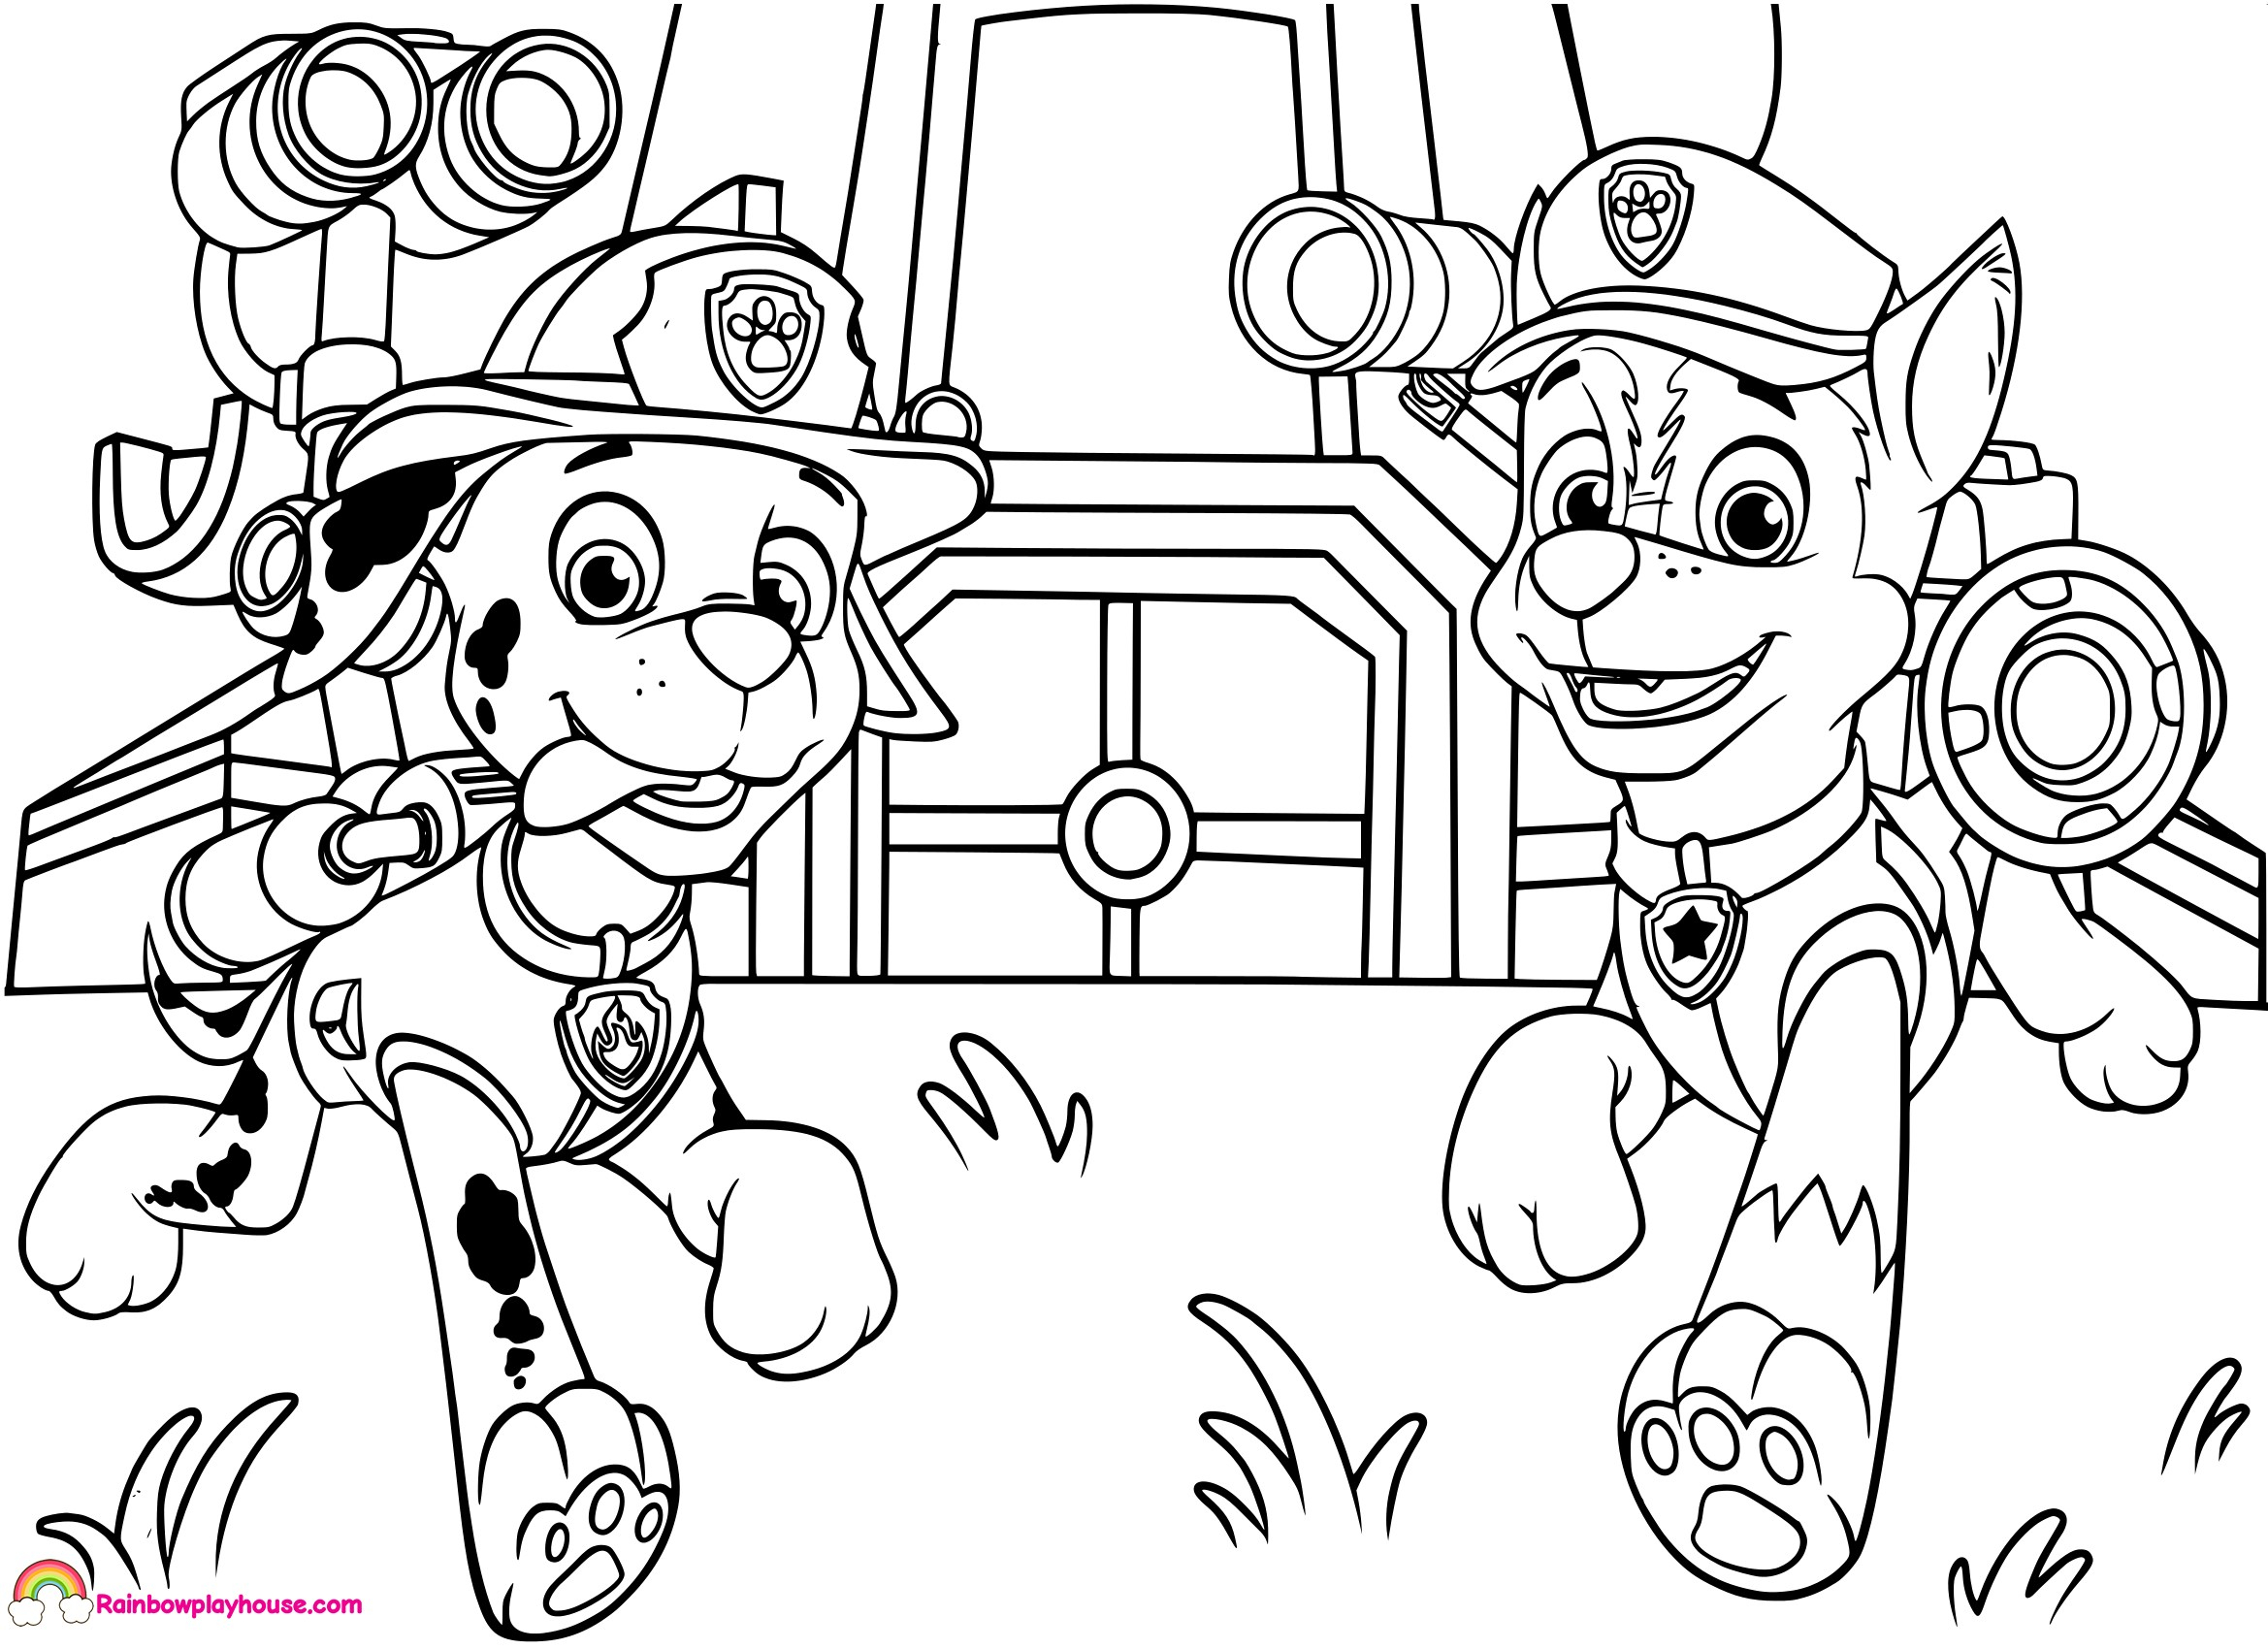 Coloring Books : Of Chase From Paw Patrol Hanna Karlzon Magical ...